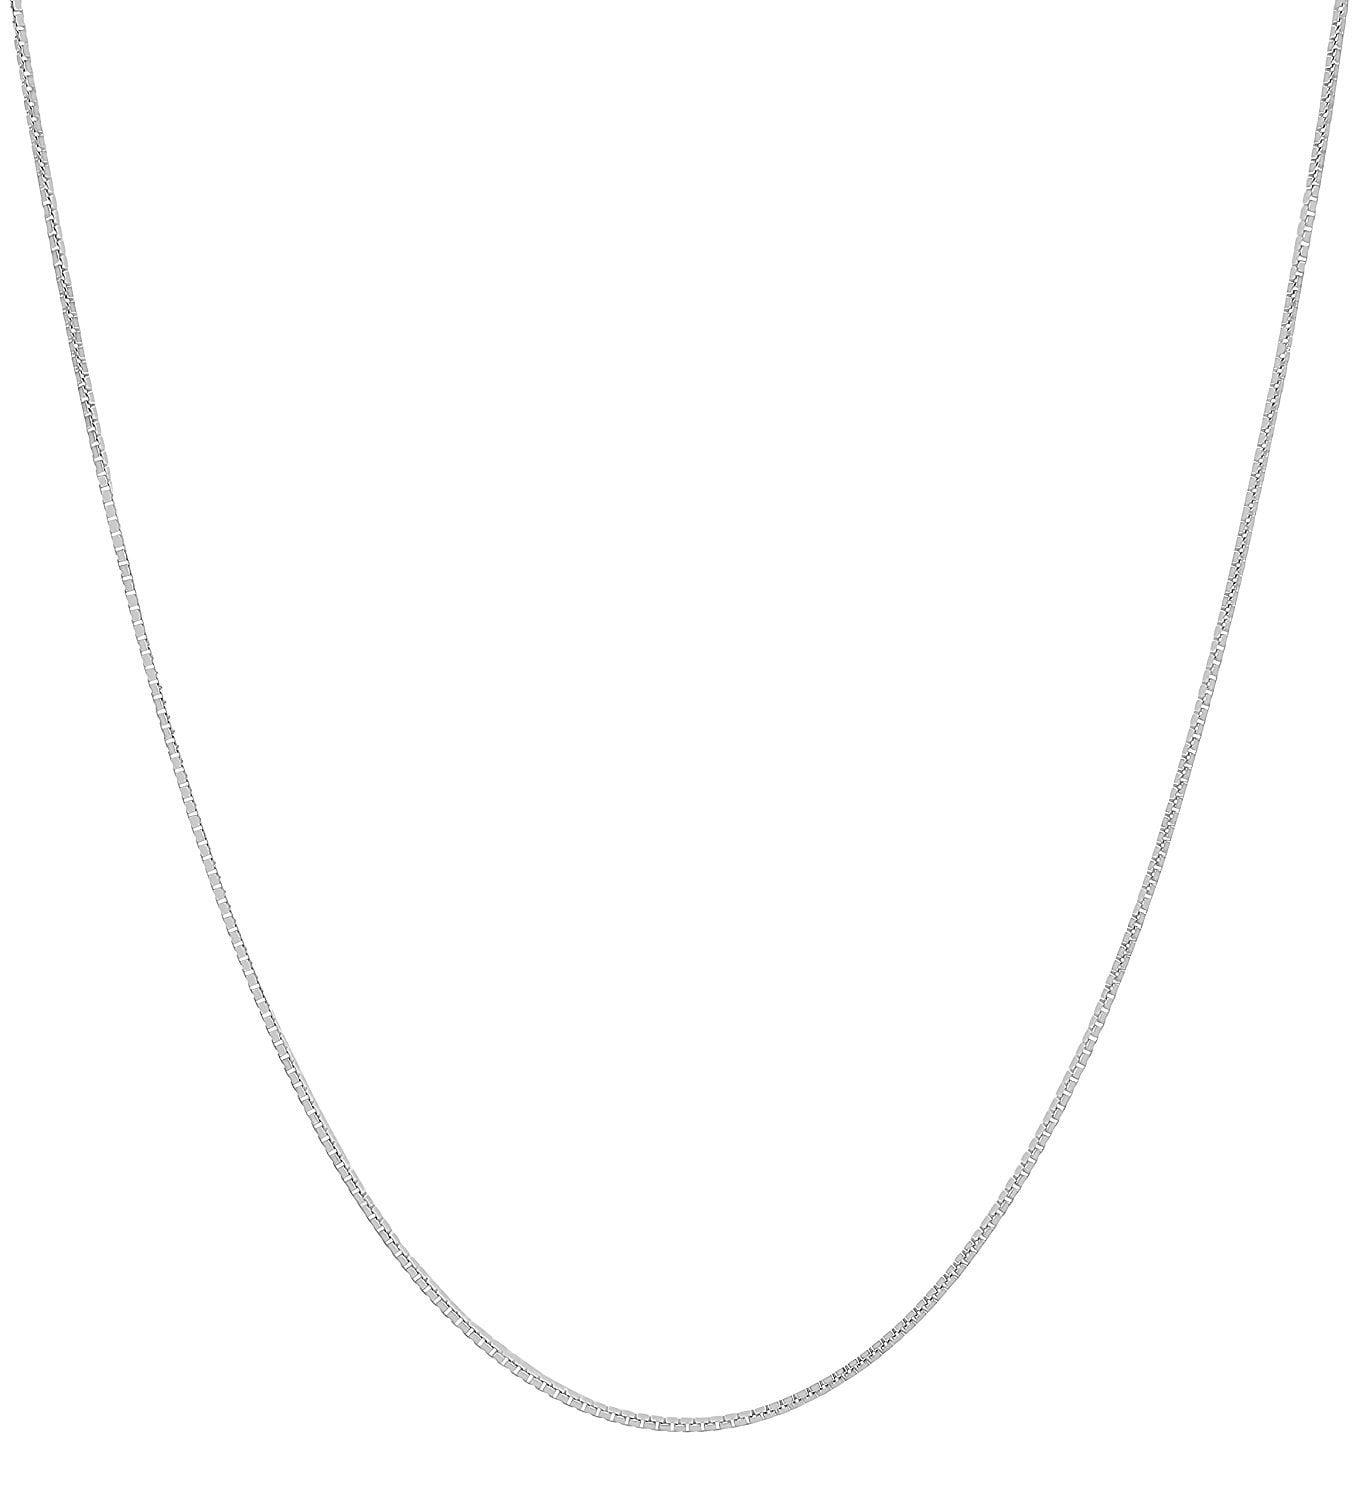 Strong 925 Silver for layering and charms 20 inch Sterling Silver 1.2mm Curb Chain Necklace with Lobster Clasp